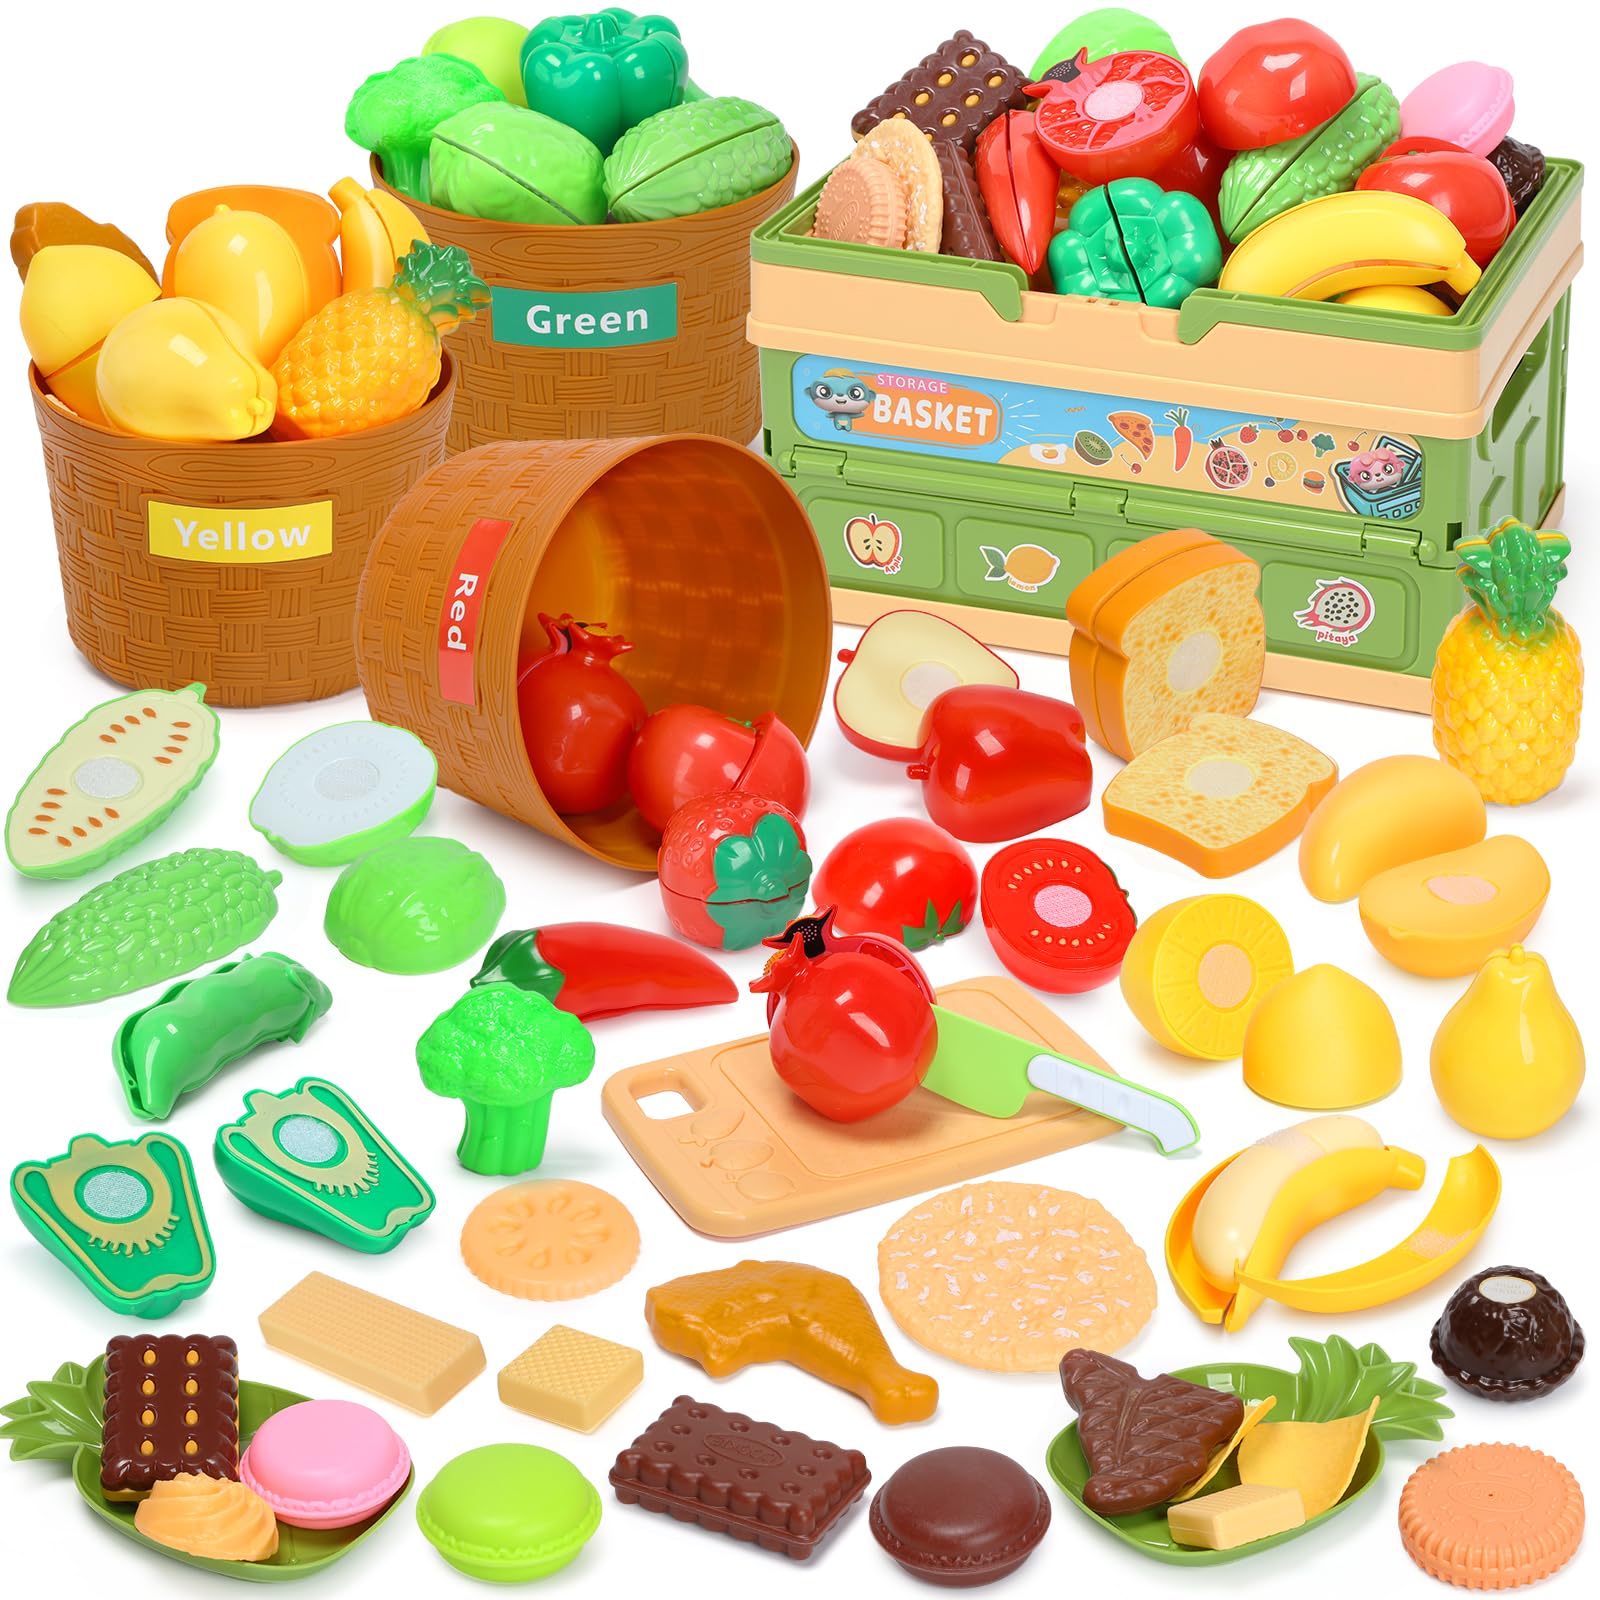 CUTE STONE Color Sorting Play Food Set,Toddlers Learning Toys, Cutting Play Food,Kids Kitchen Toy Accessories,Easter Basket Stuffers for Boys & Girls